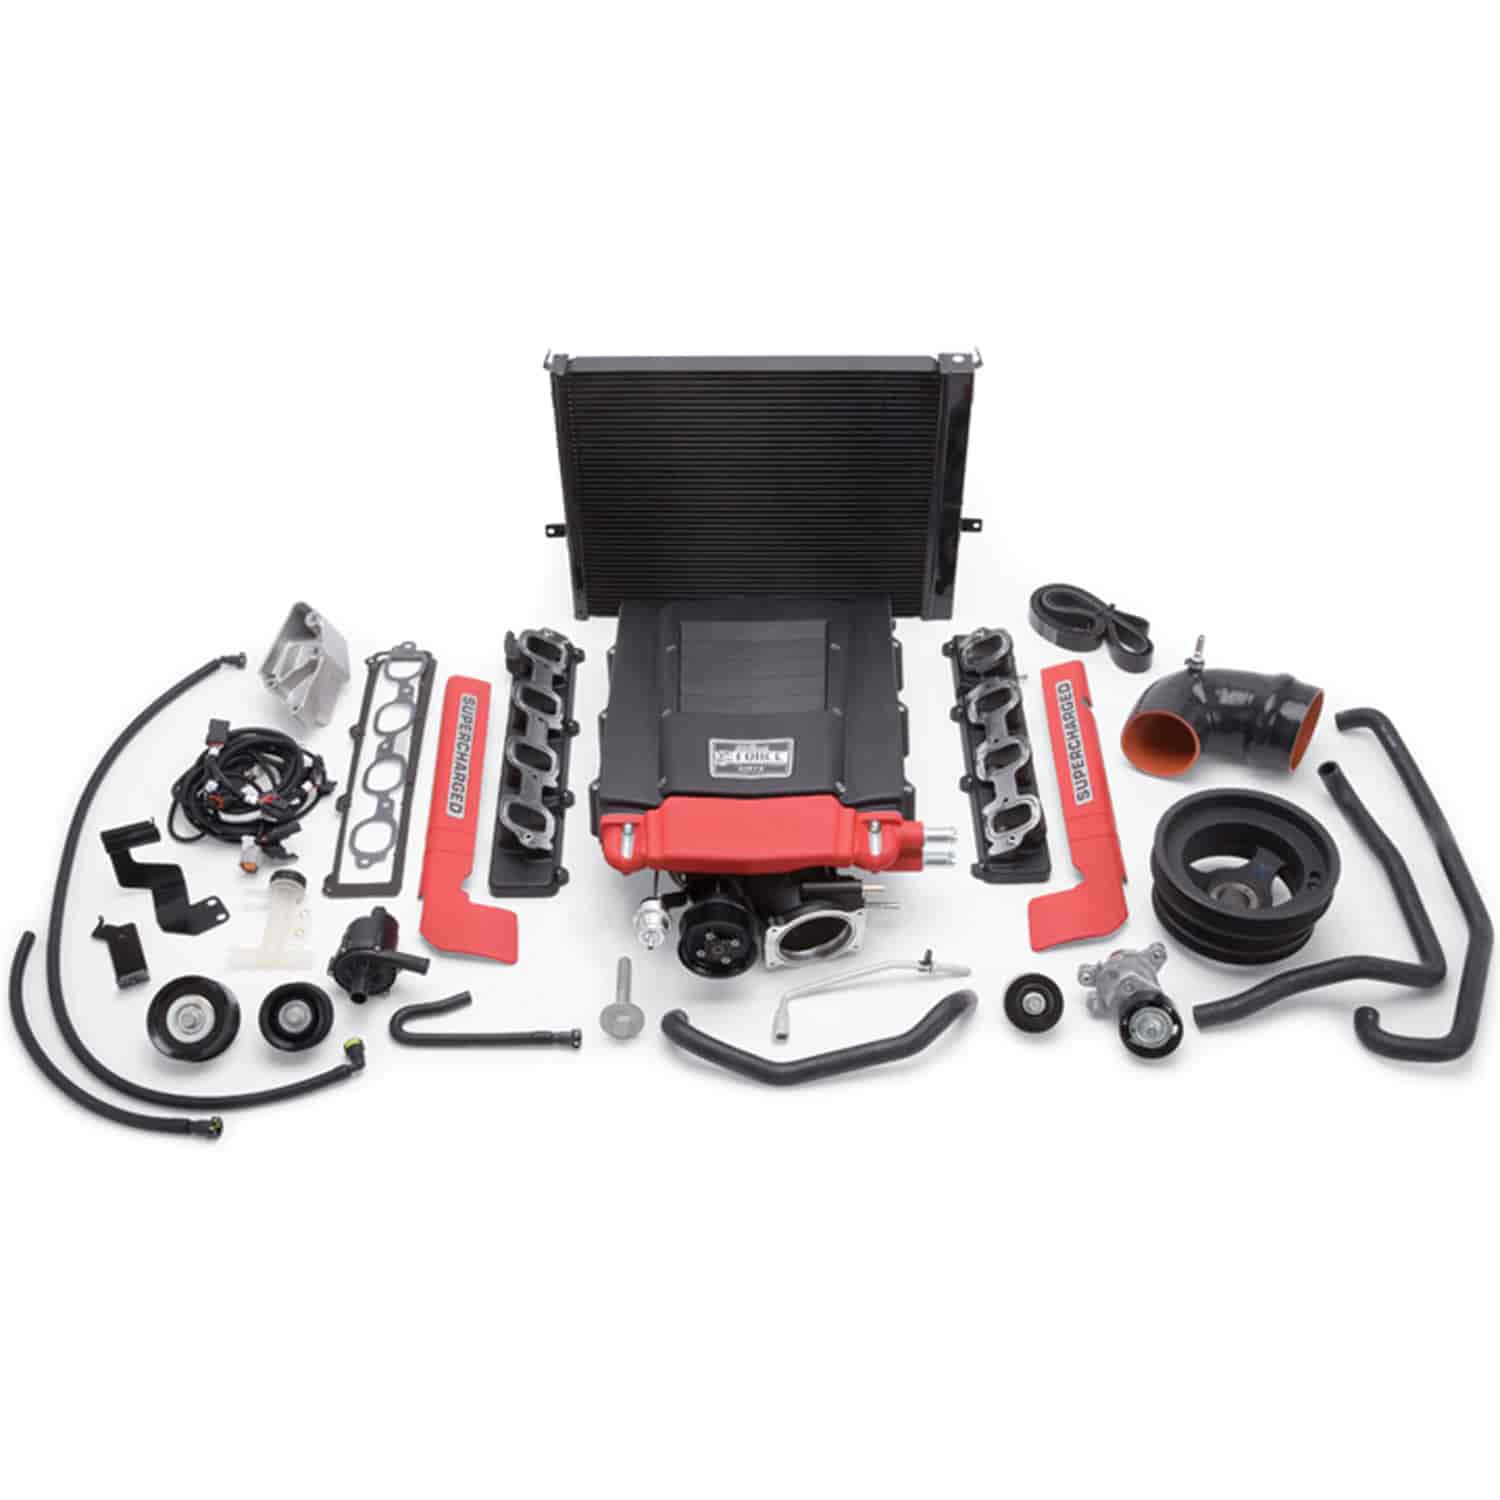 E-Force Stage 1 Supercharger Kit for 2016 Camaro SS without Tuner